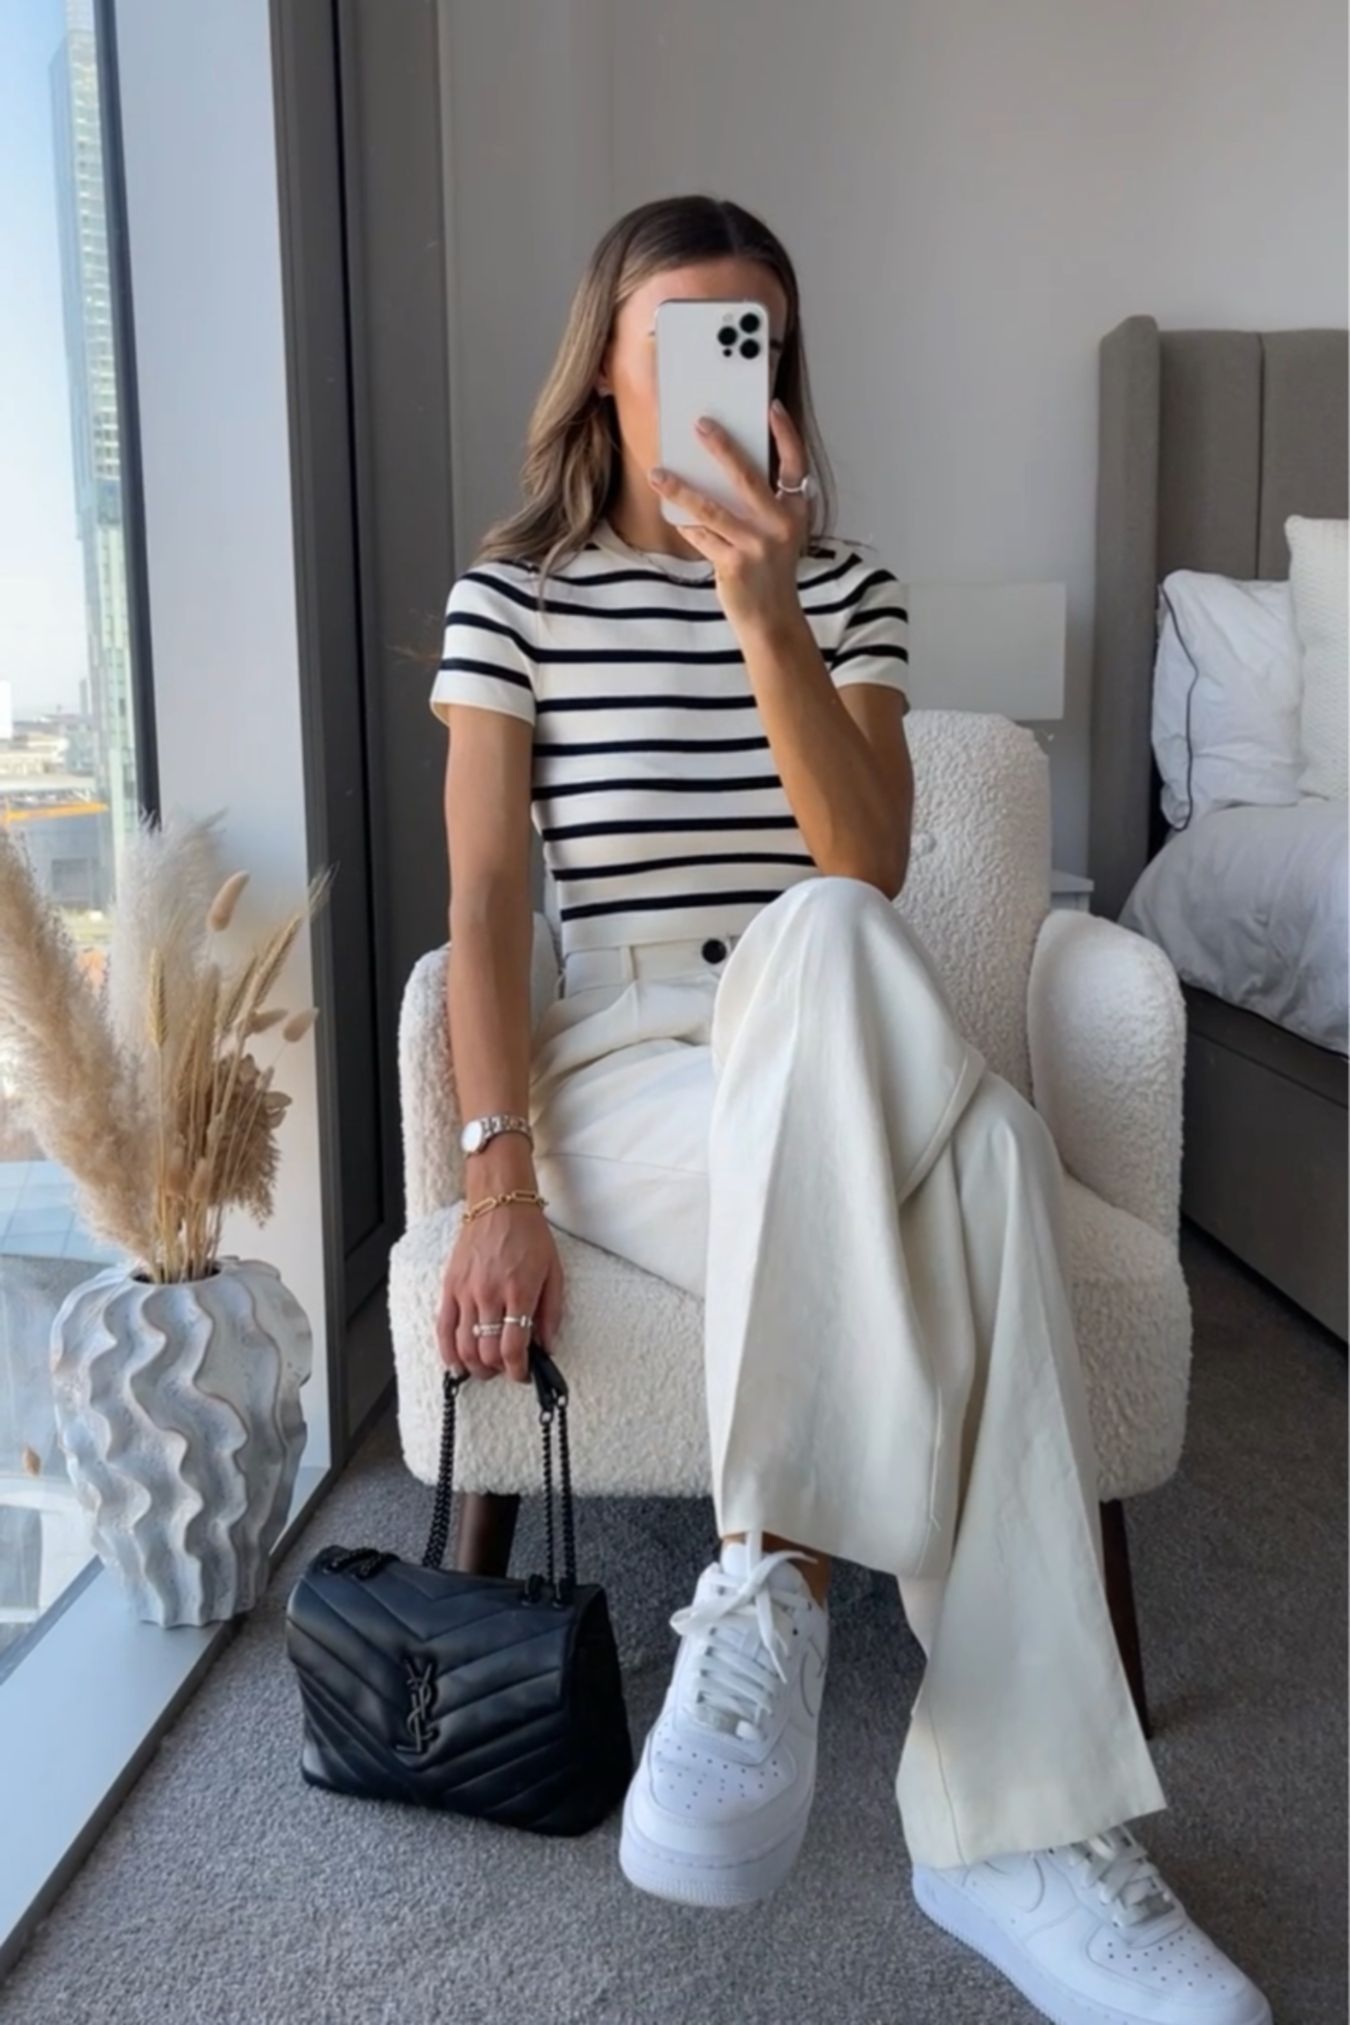 Latest Spring Work Outfit Ideas